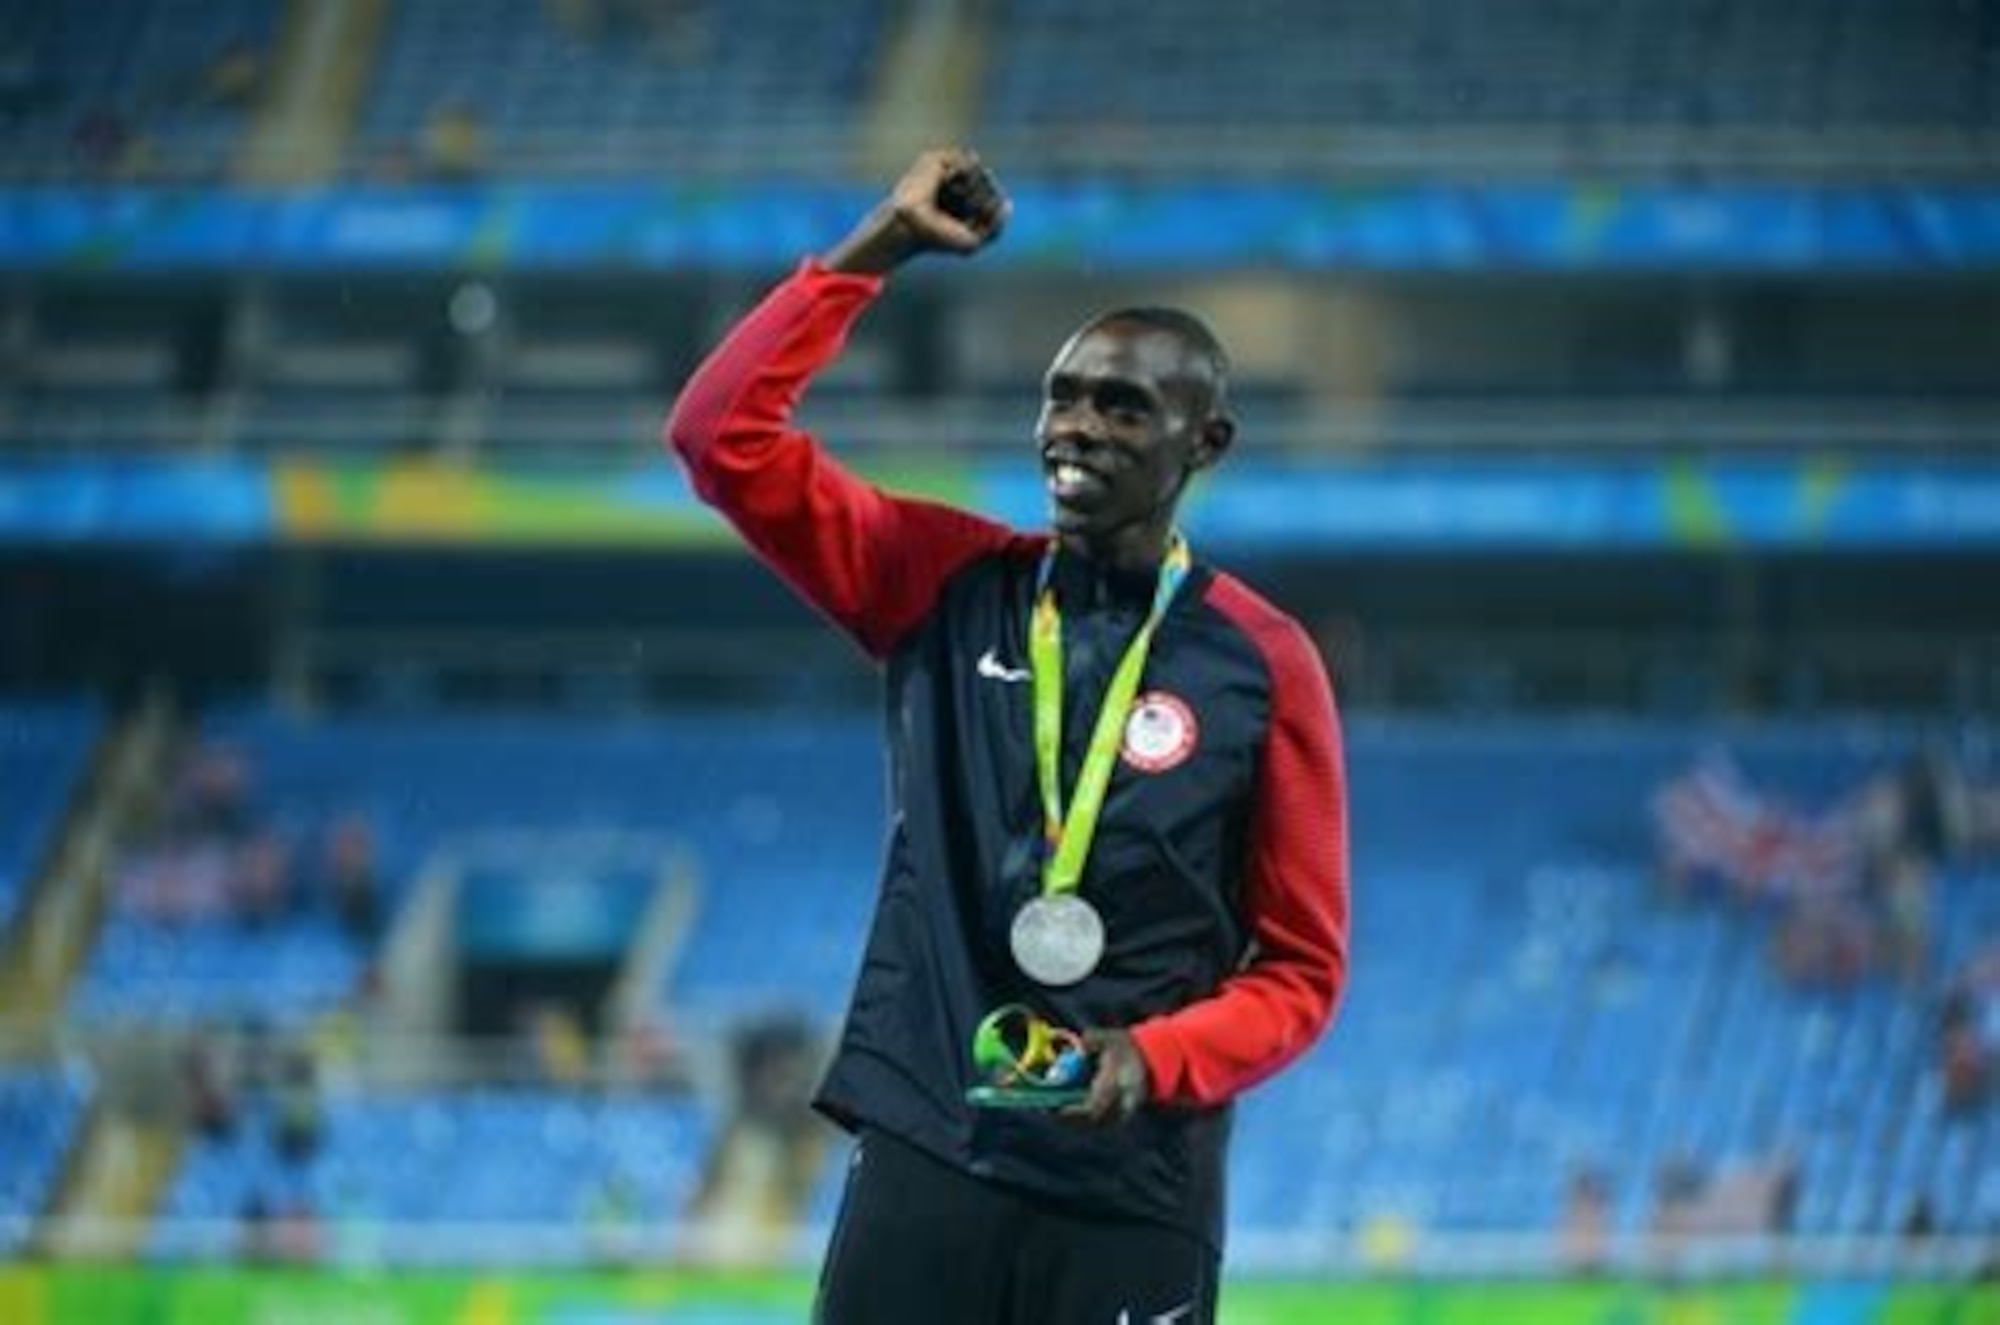 American Olympian and U.S. Army veteran Paul Chelimo will be the 2020 Air Force Marathon guest speaker.  Chelimo was the 2016 Olympic silver medalist at 5000 meters in Rio and the 2017 World Championship bronze medalist at 5000 meters. He is currently training for the 2020 Summer Olympics in Tokyo in August. (Courtesy photo)